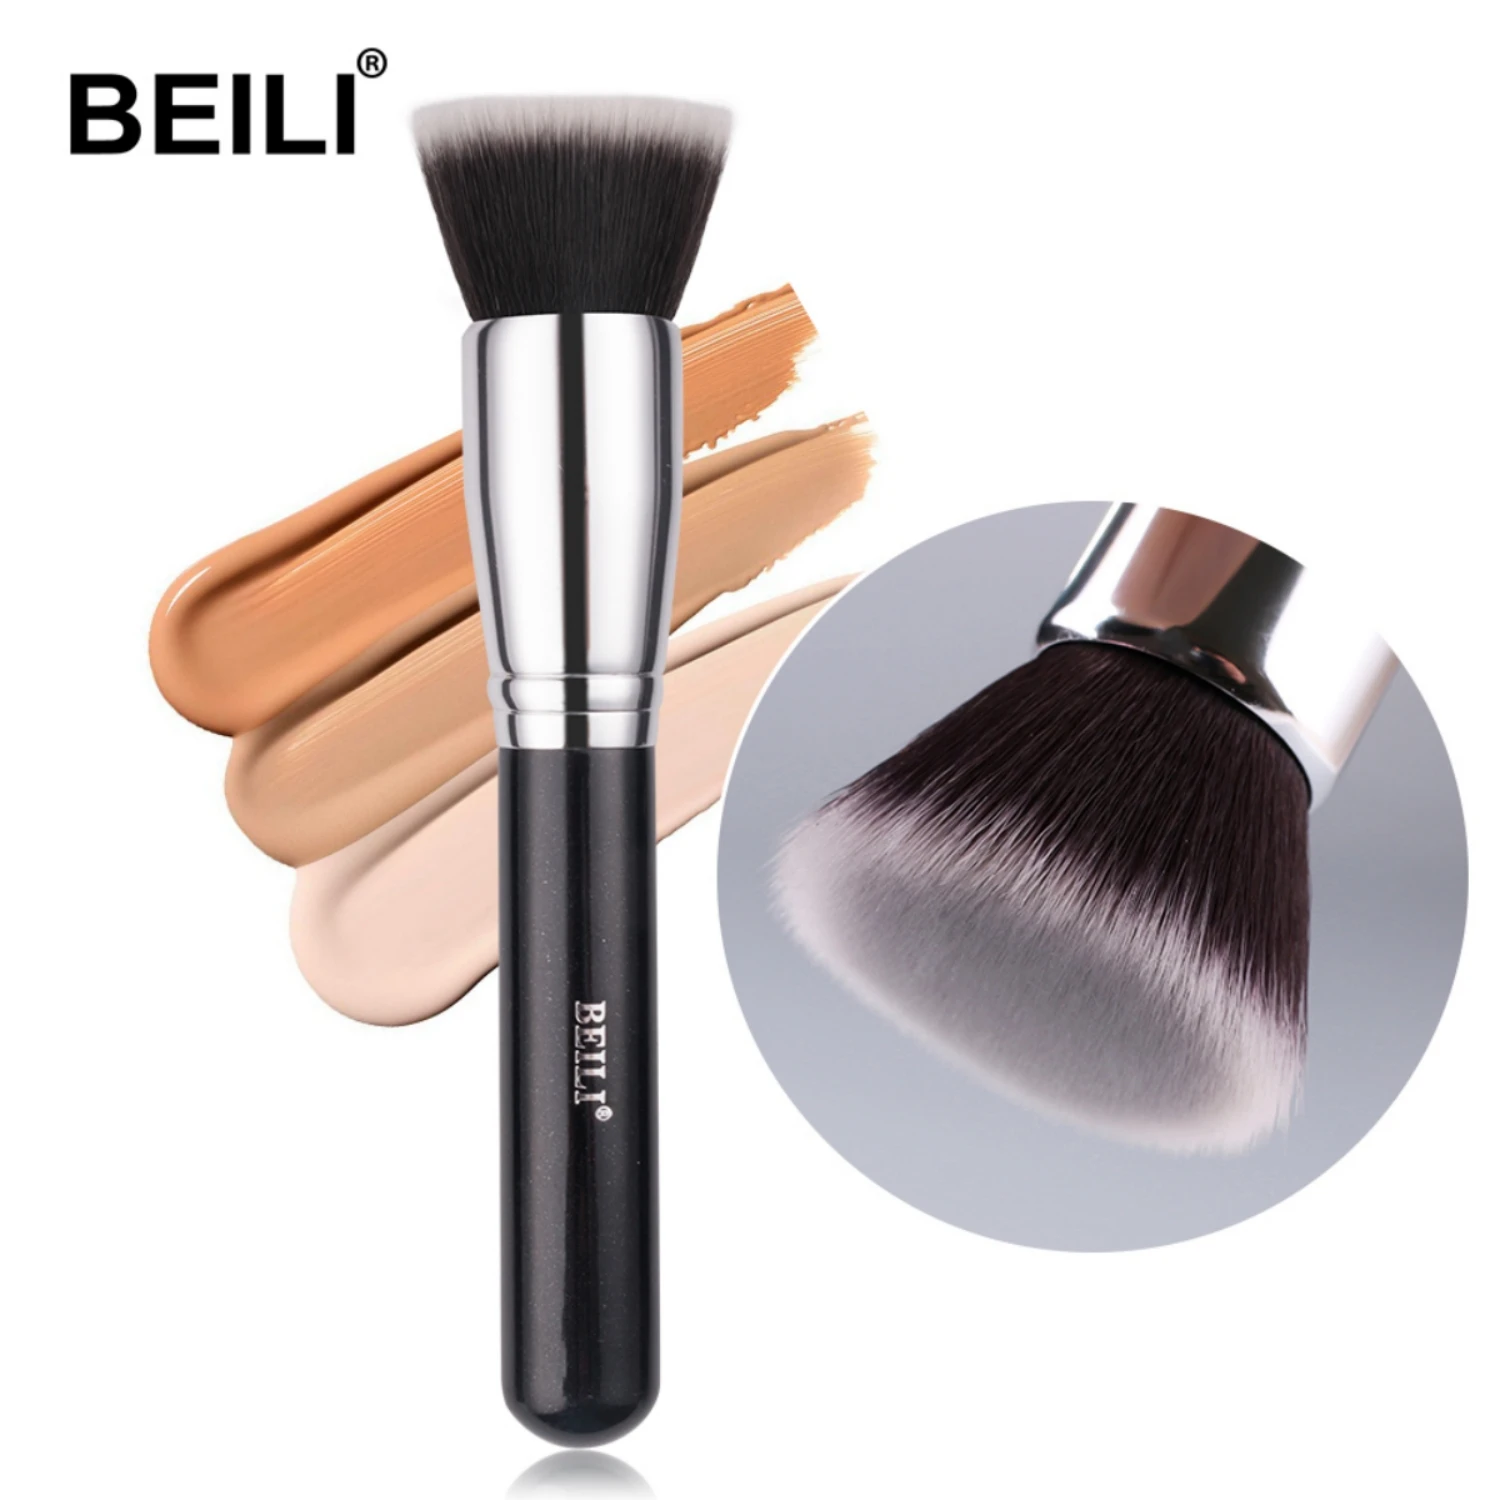 This makeup brush set is a bestseller on